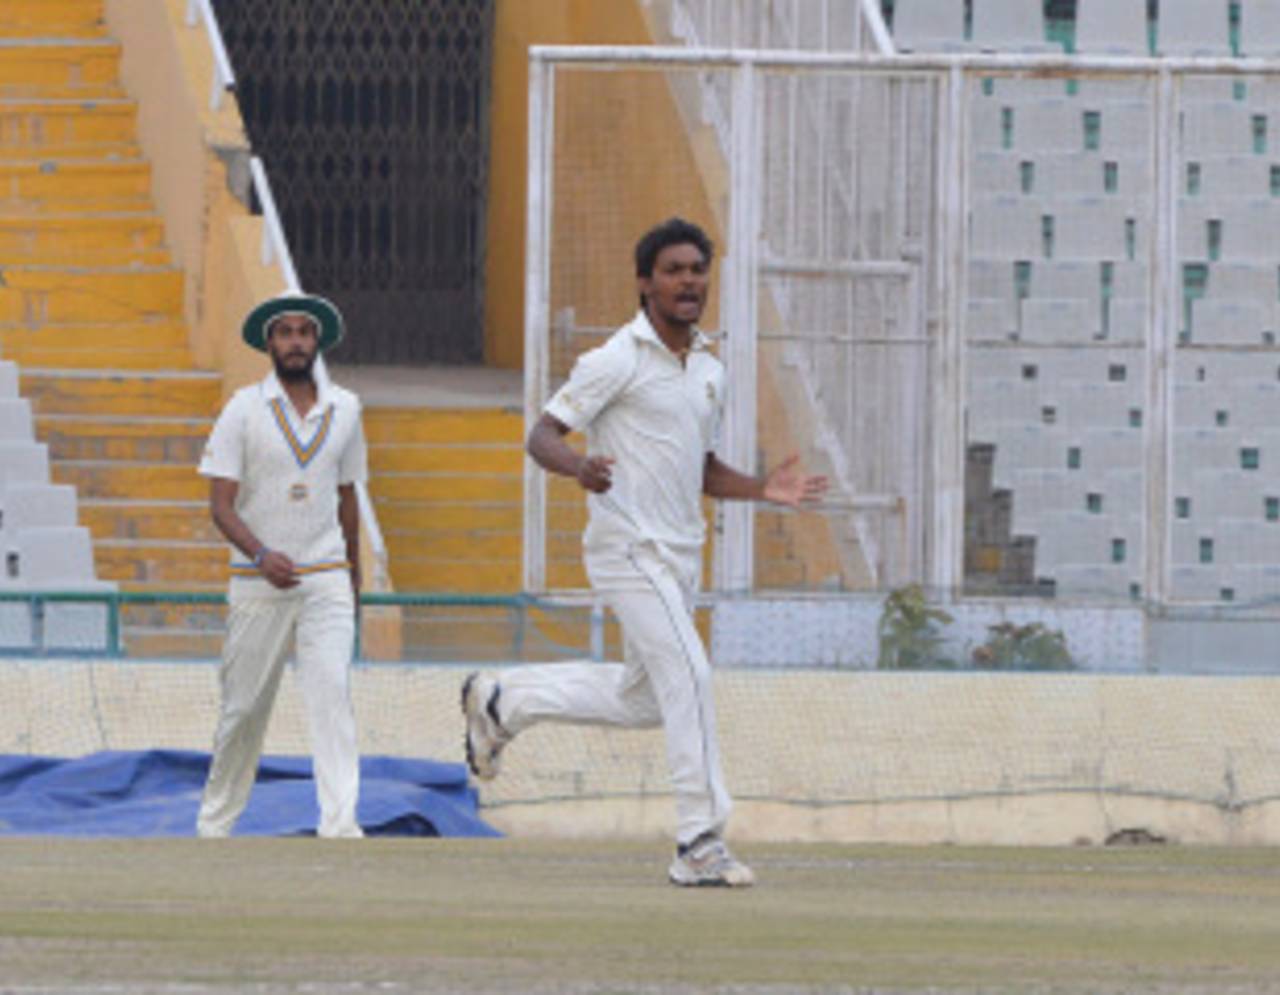 Sandeep Sharma outperformed his Under-19 counterparts in the more testing arena of the Ranji Trophy&nbsp;&nbsp;&bull;&nbsp;&nbsp;ESPNcricinfo Ltd